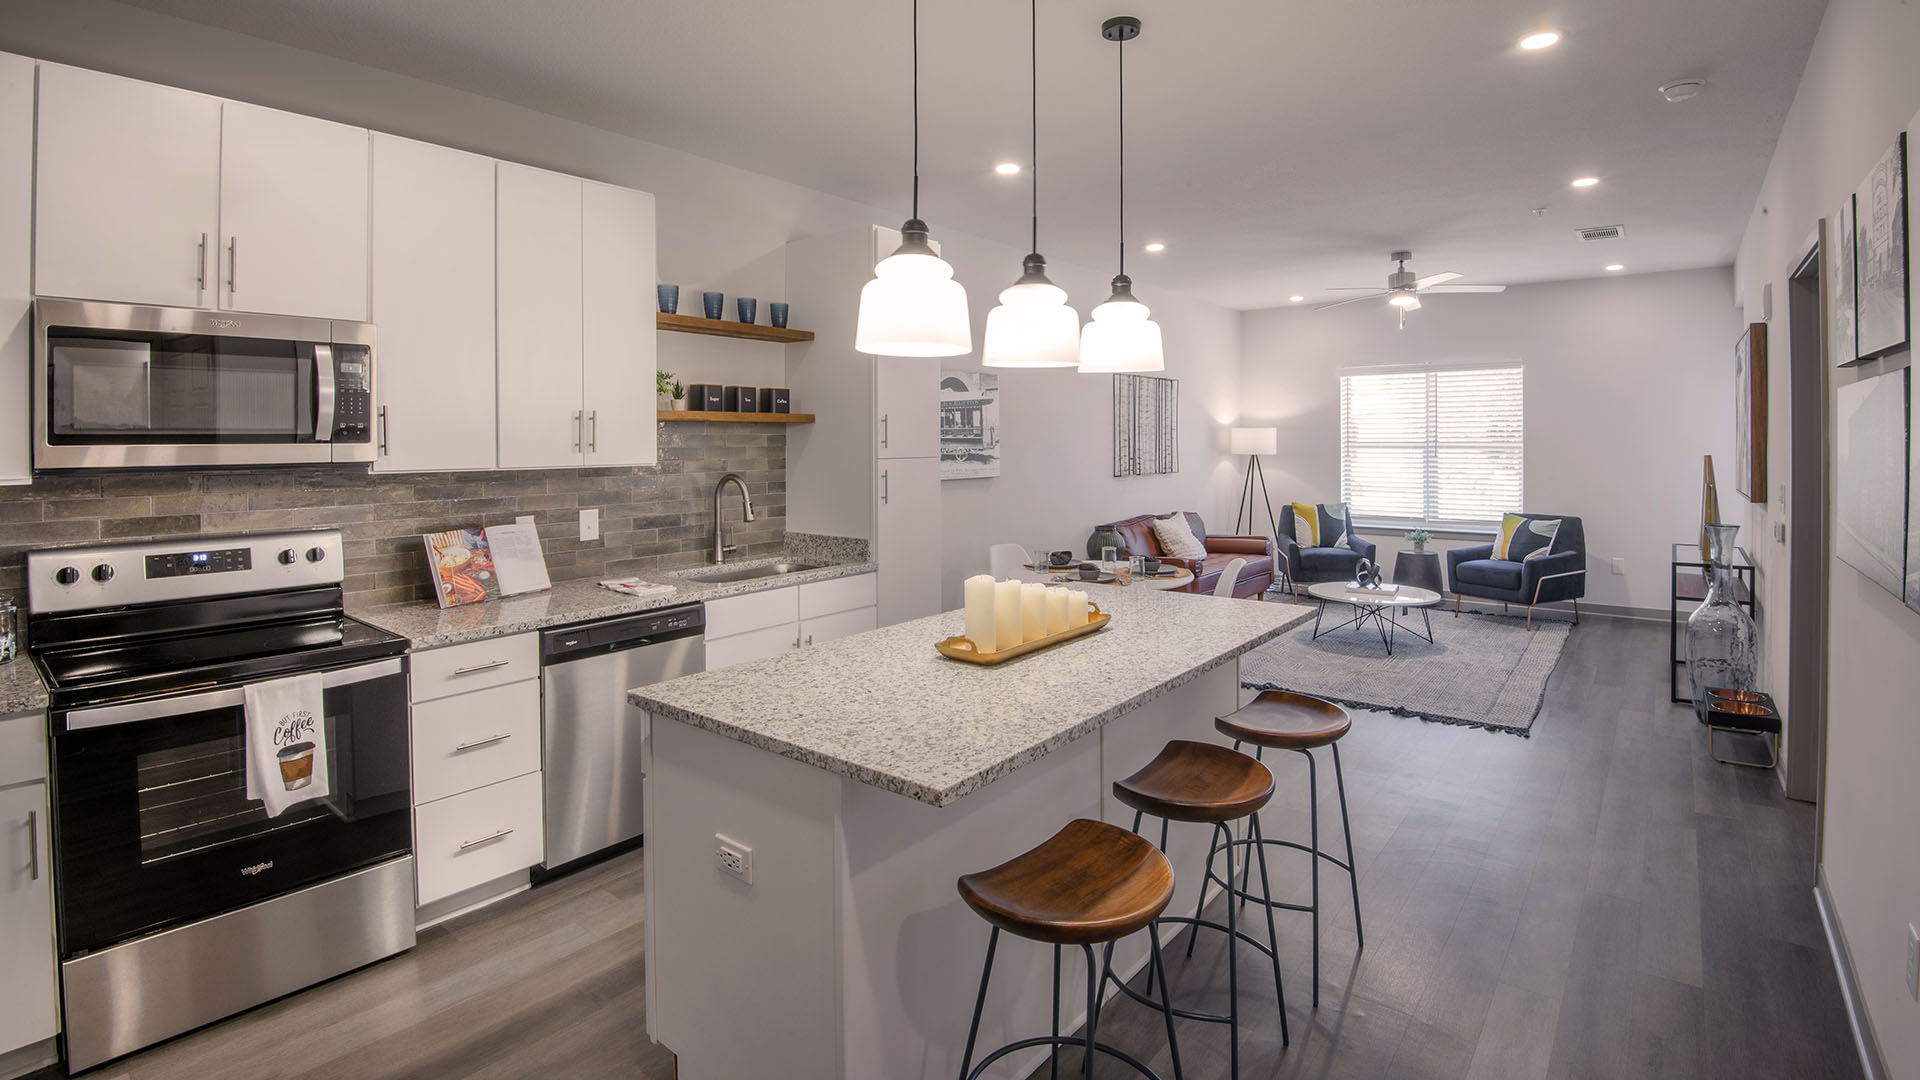 birmingham al apartments - Axel Row Apartments - Bright kitchen adjacent to living room featuring stainless steel appliances, white cabinetry, granite countertop island with wooden stool seats, and three white hanging ceiling lights.